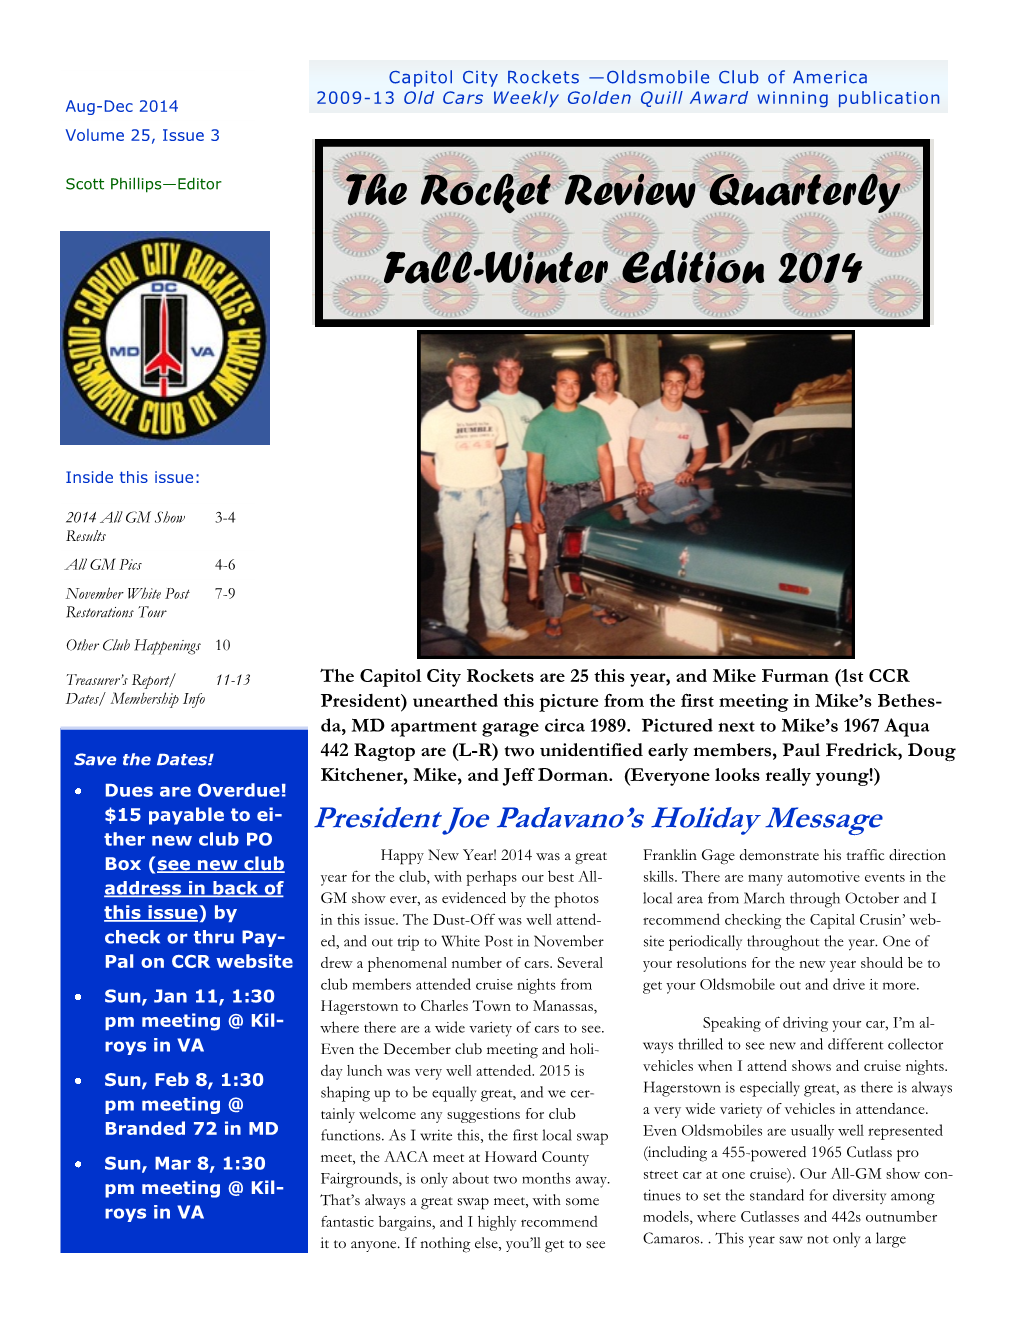 The Rocket Review Quarterly Fall-Winter Edition 2014